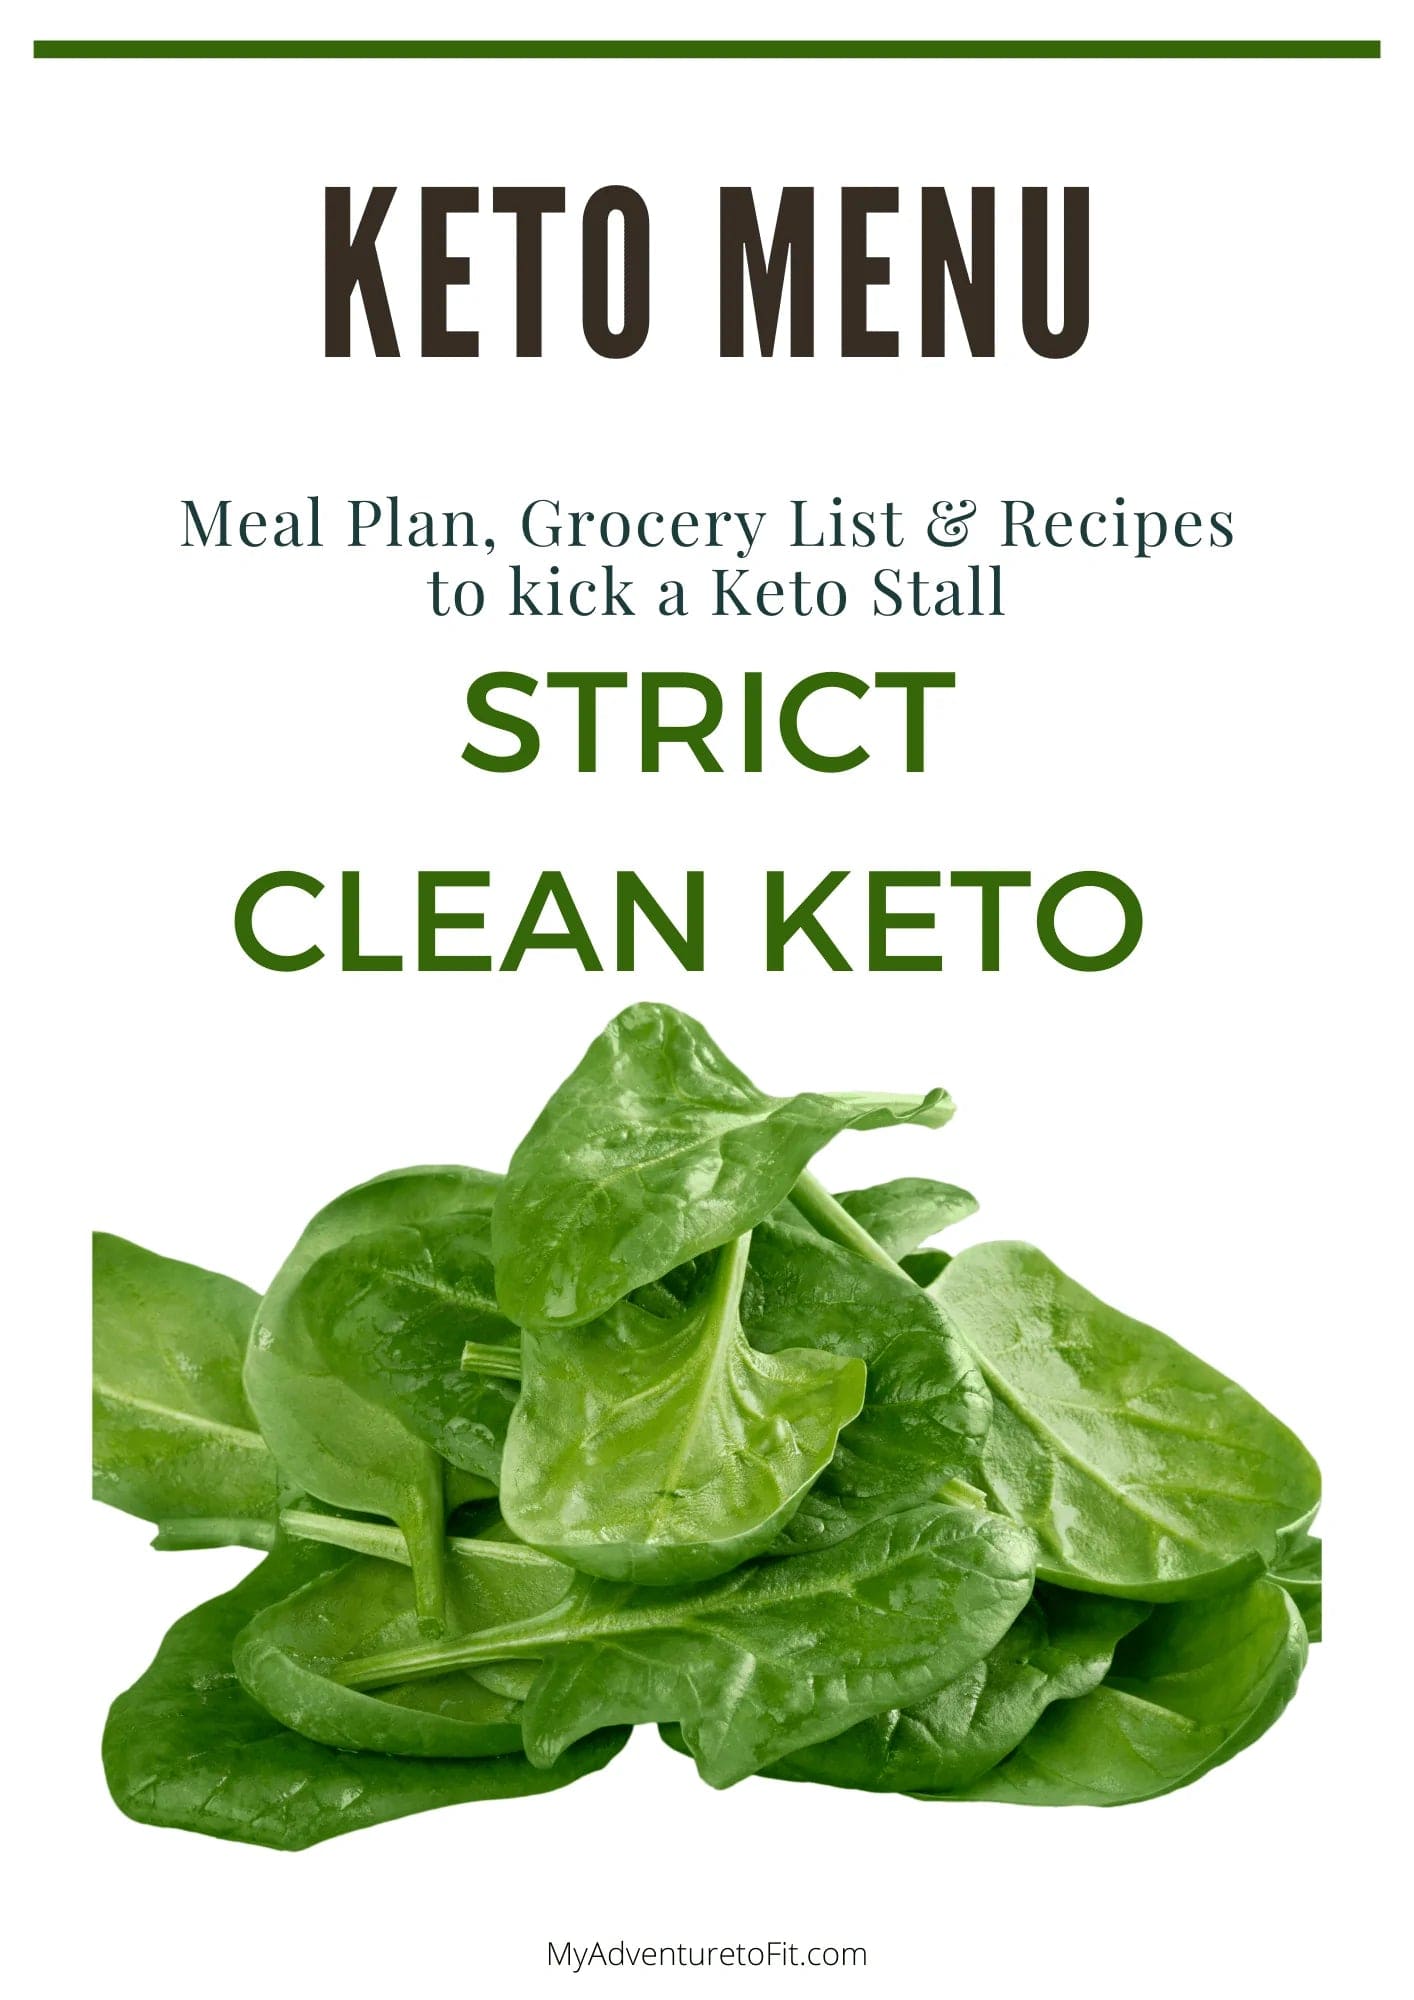 Strict Clean Keto Menu - Breaking a Keto Stall - My Adventure to Fit